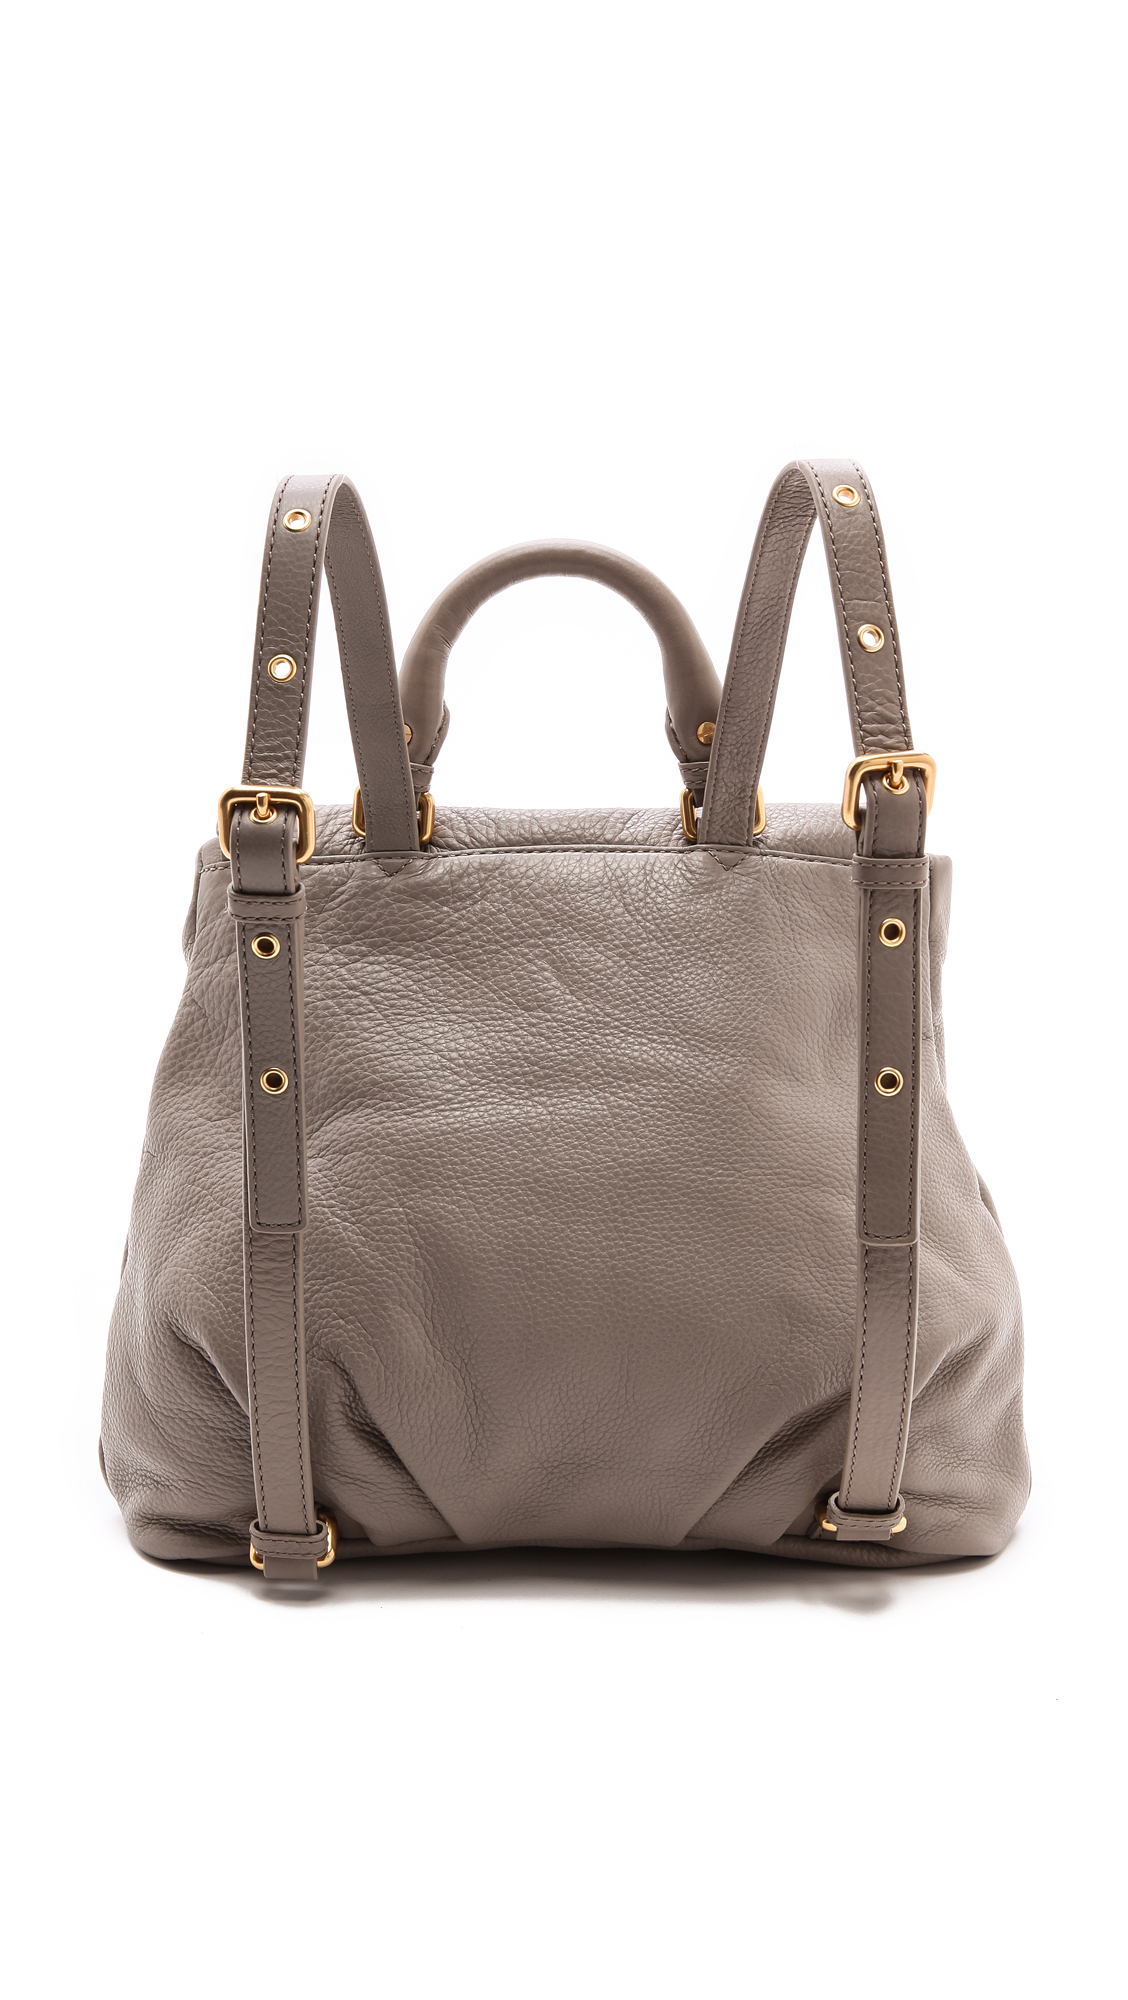 Lyst - Marc by marc jacobs Classic Q Mariska Backpack in Gray